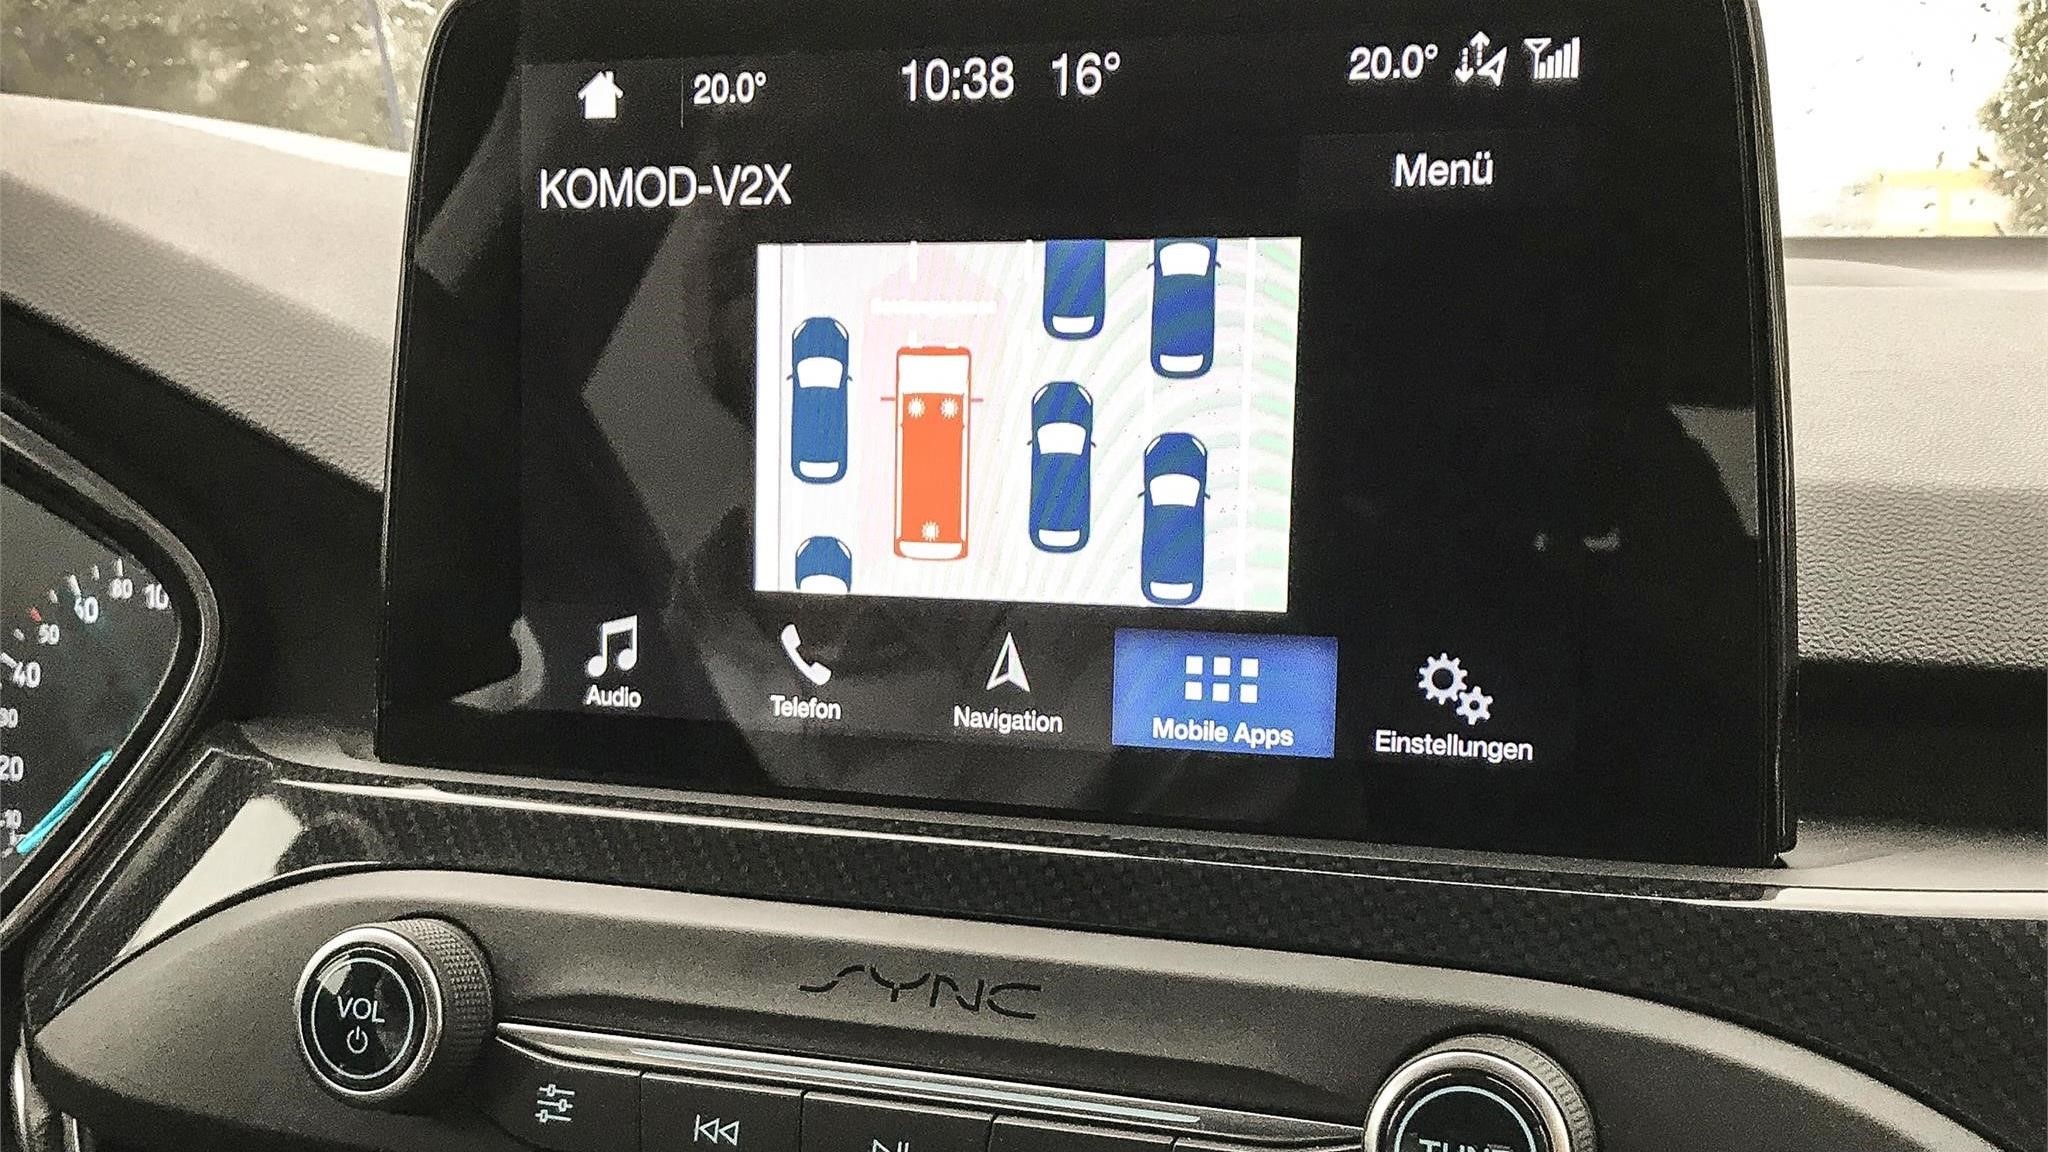 Ford & Vodafone Are Testing New Connected Vehicle Technologies